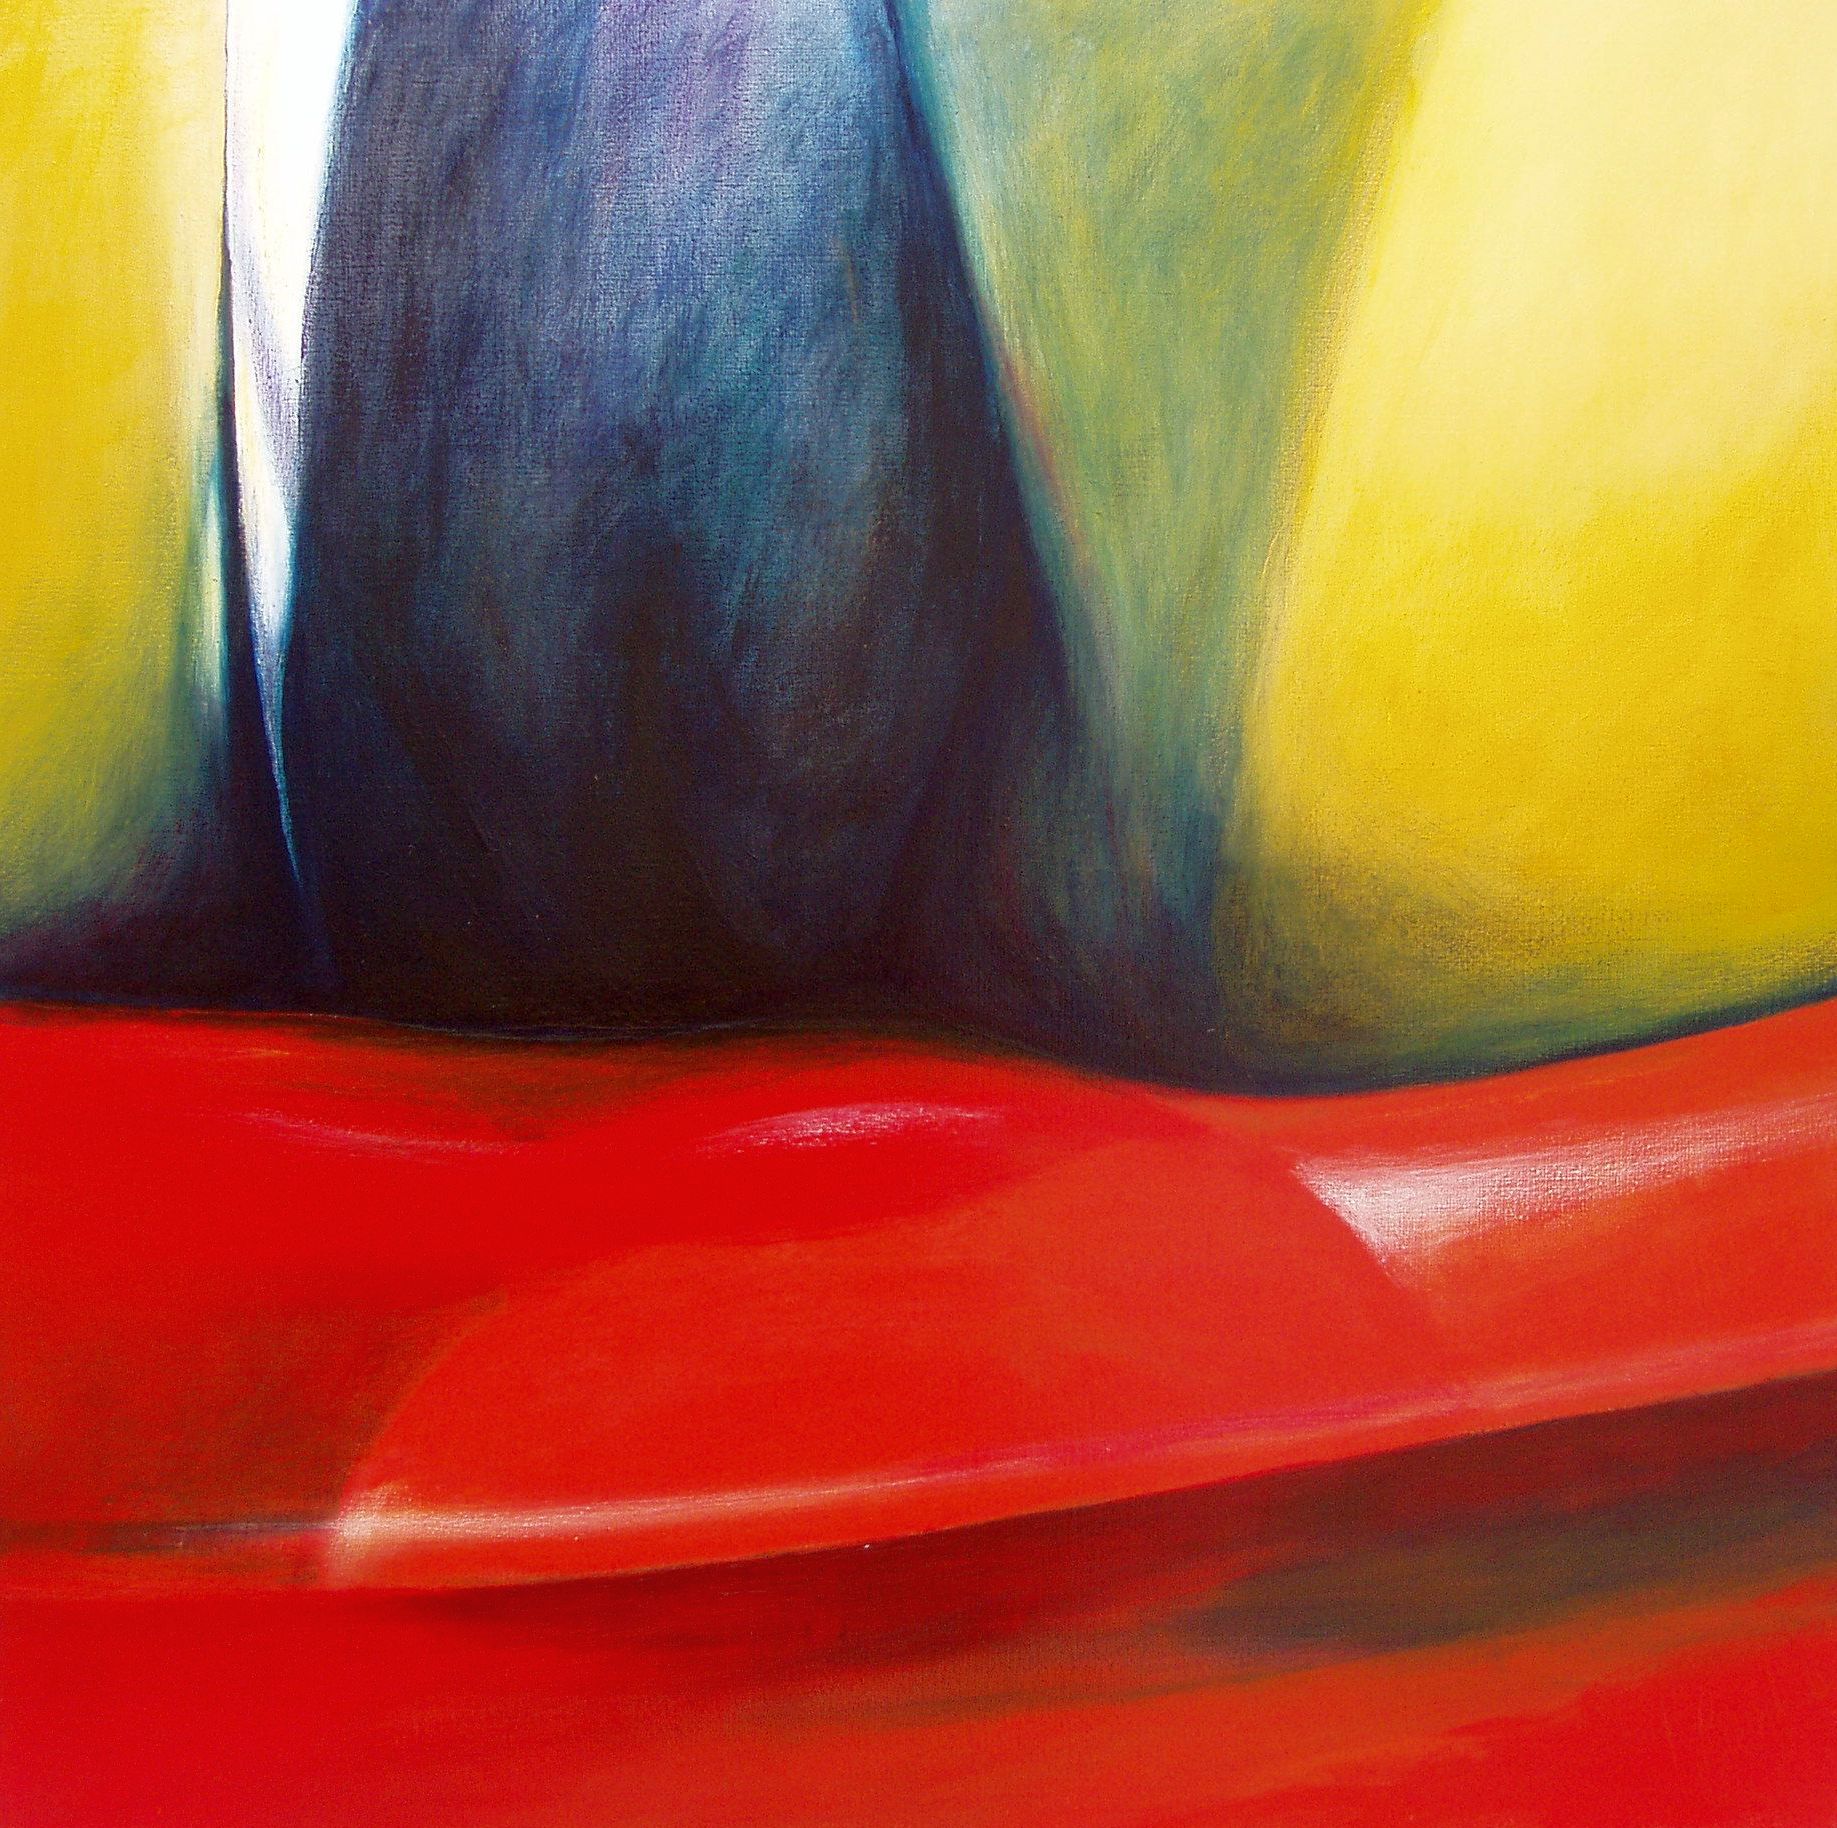 Chaise Rouge willem berkers acryl on canvas